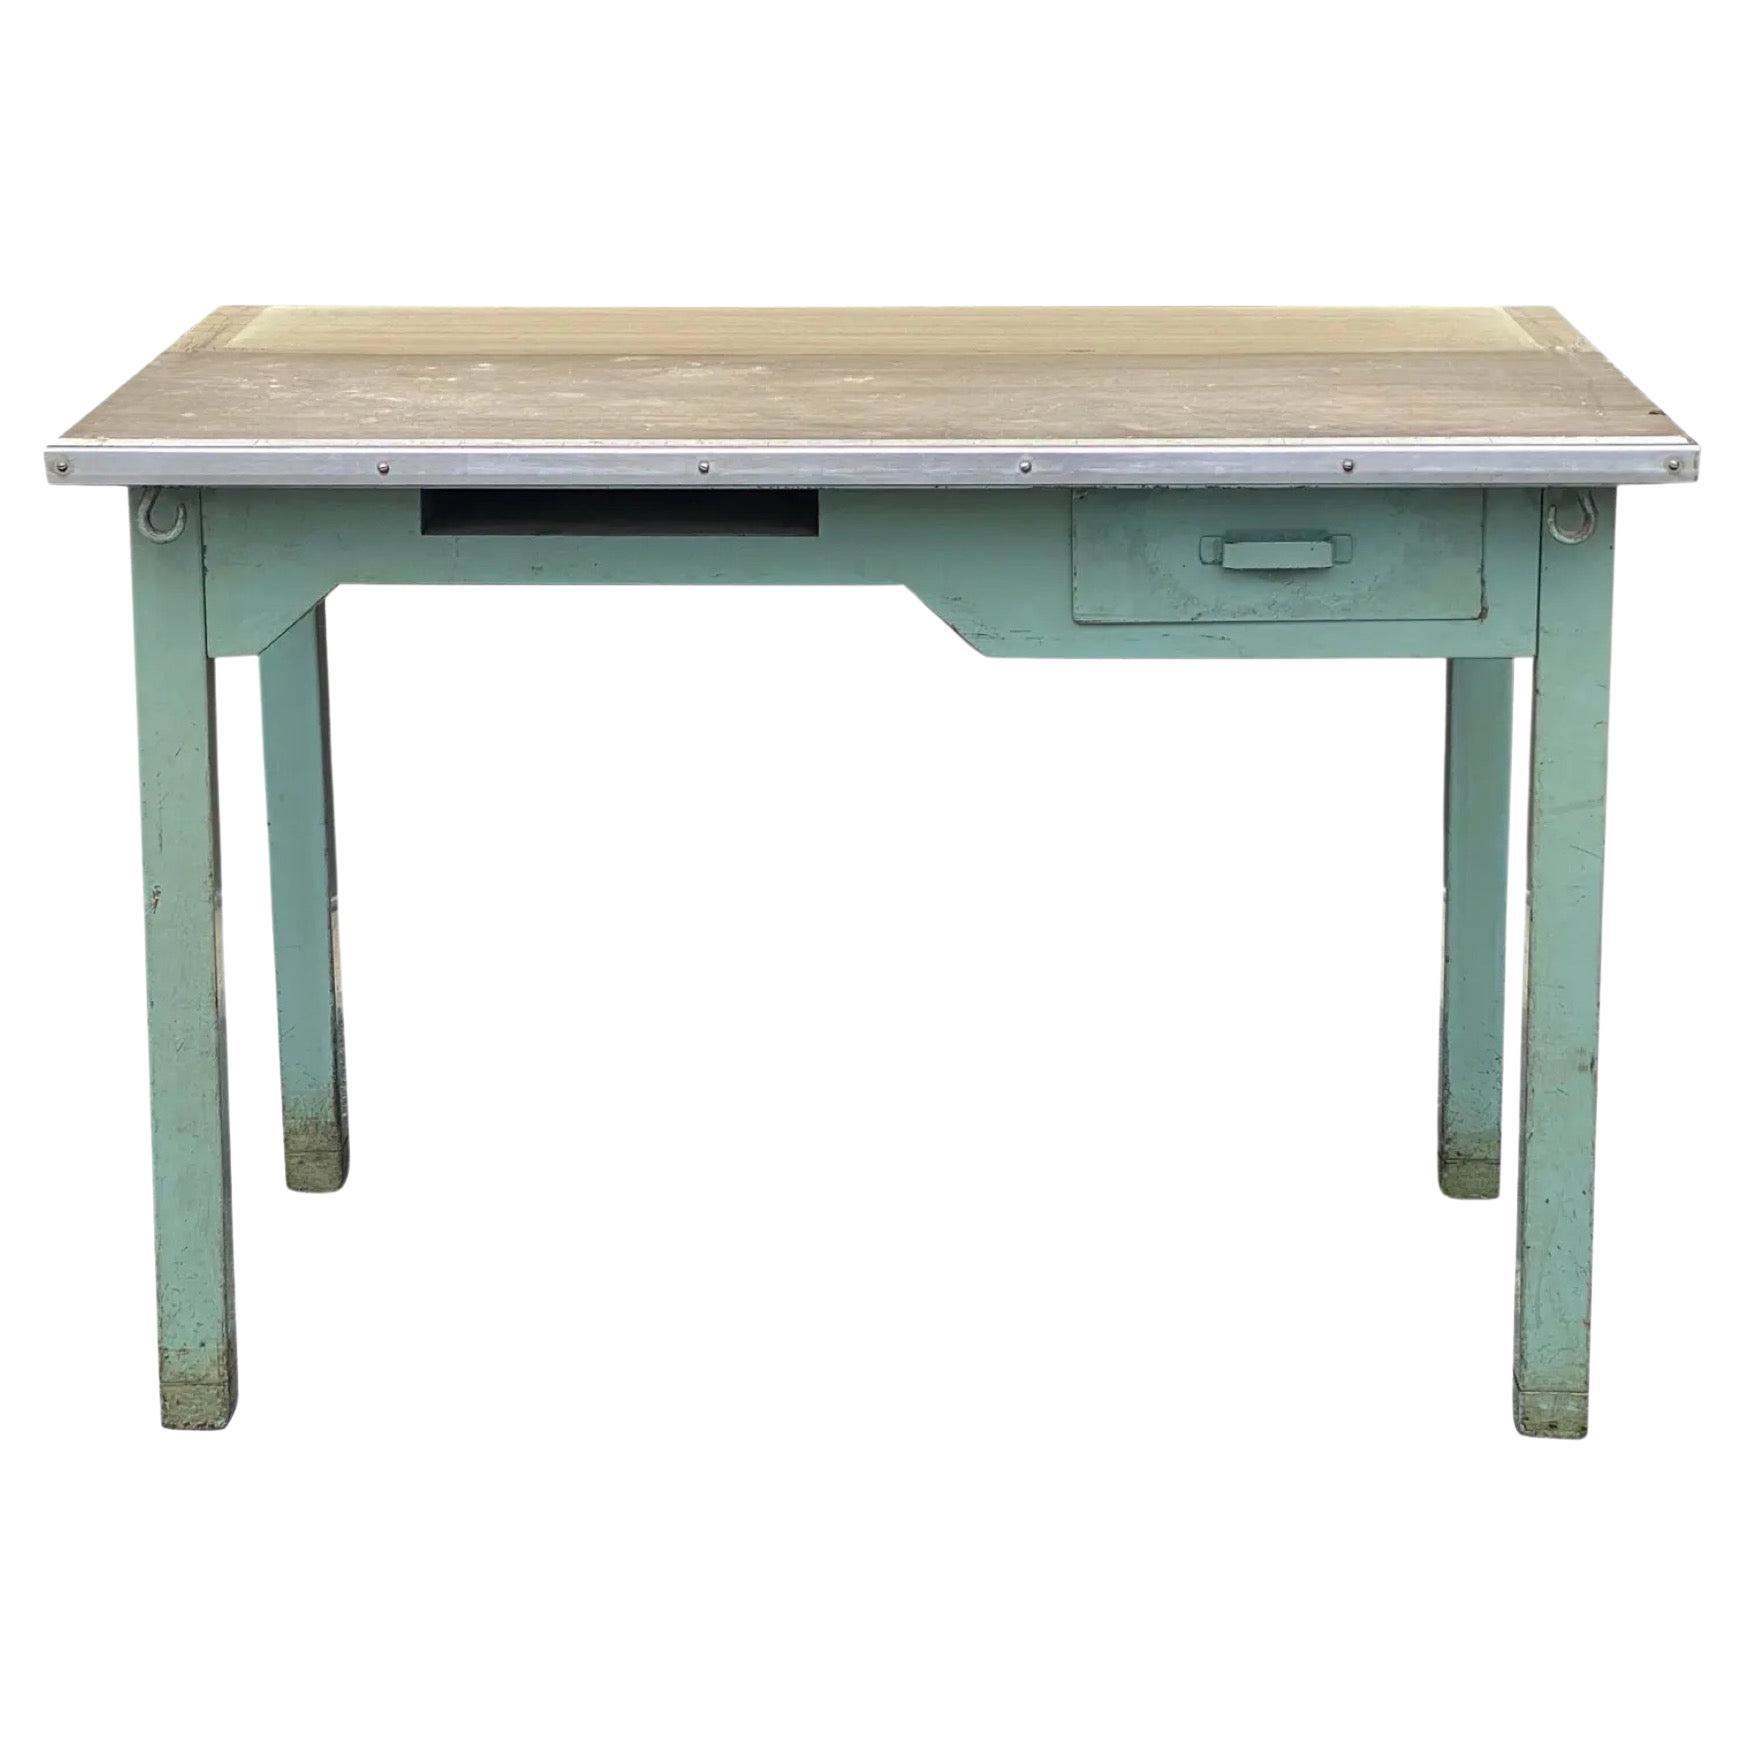 1950's Post Office Steel Industrial Mail Sorting Desk Workstation Table For Sale